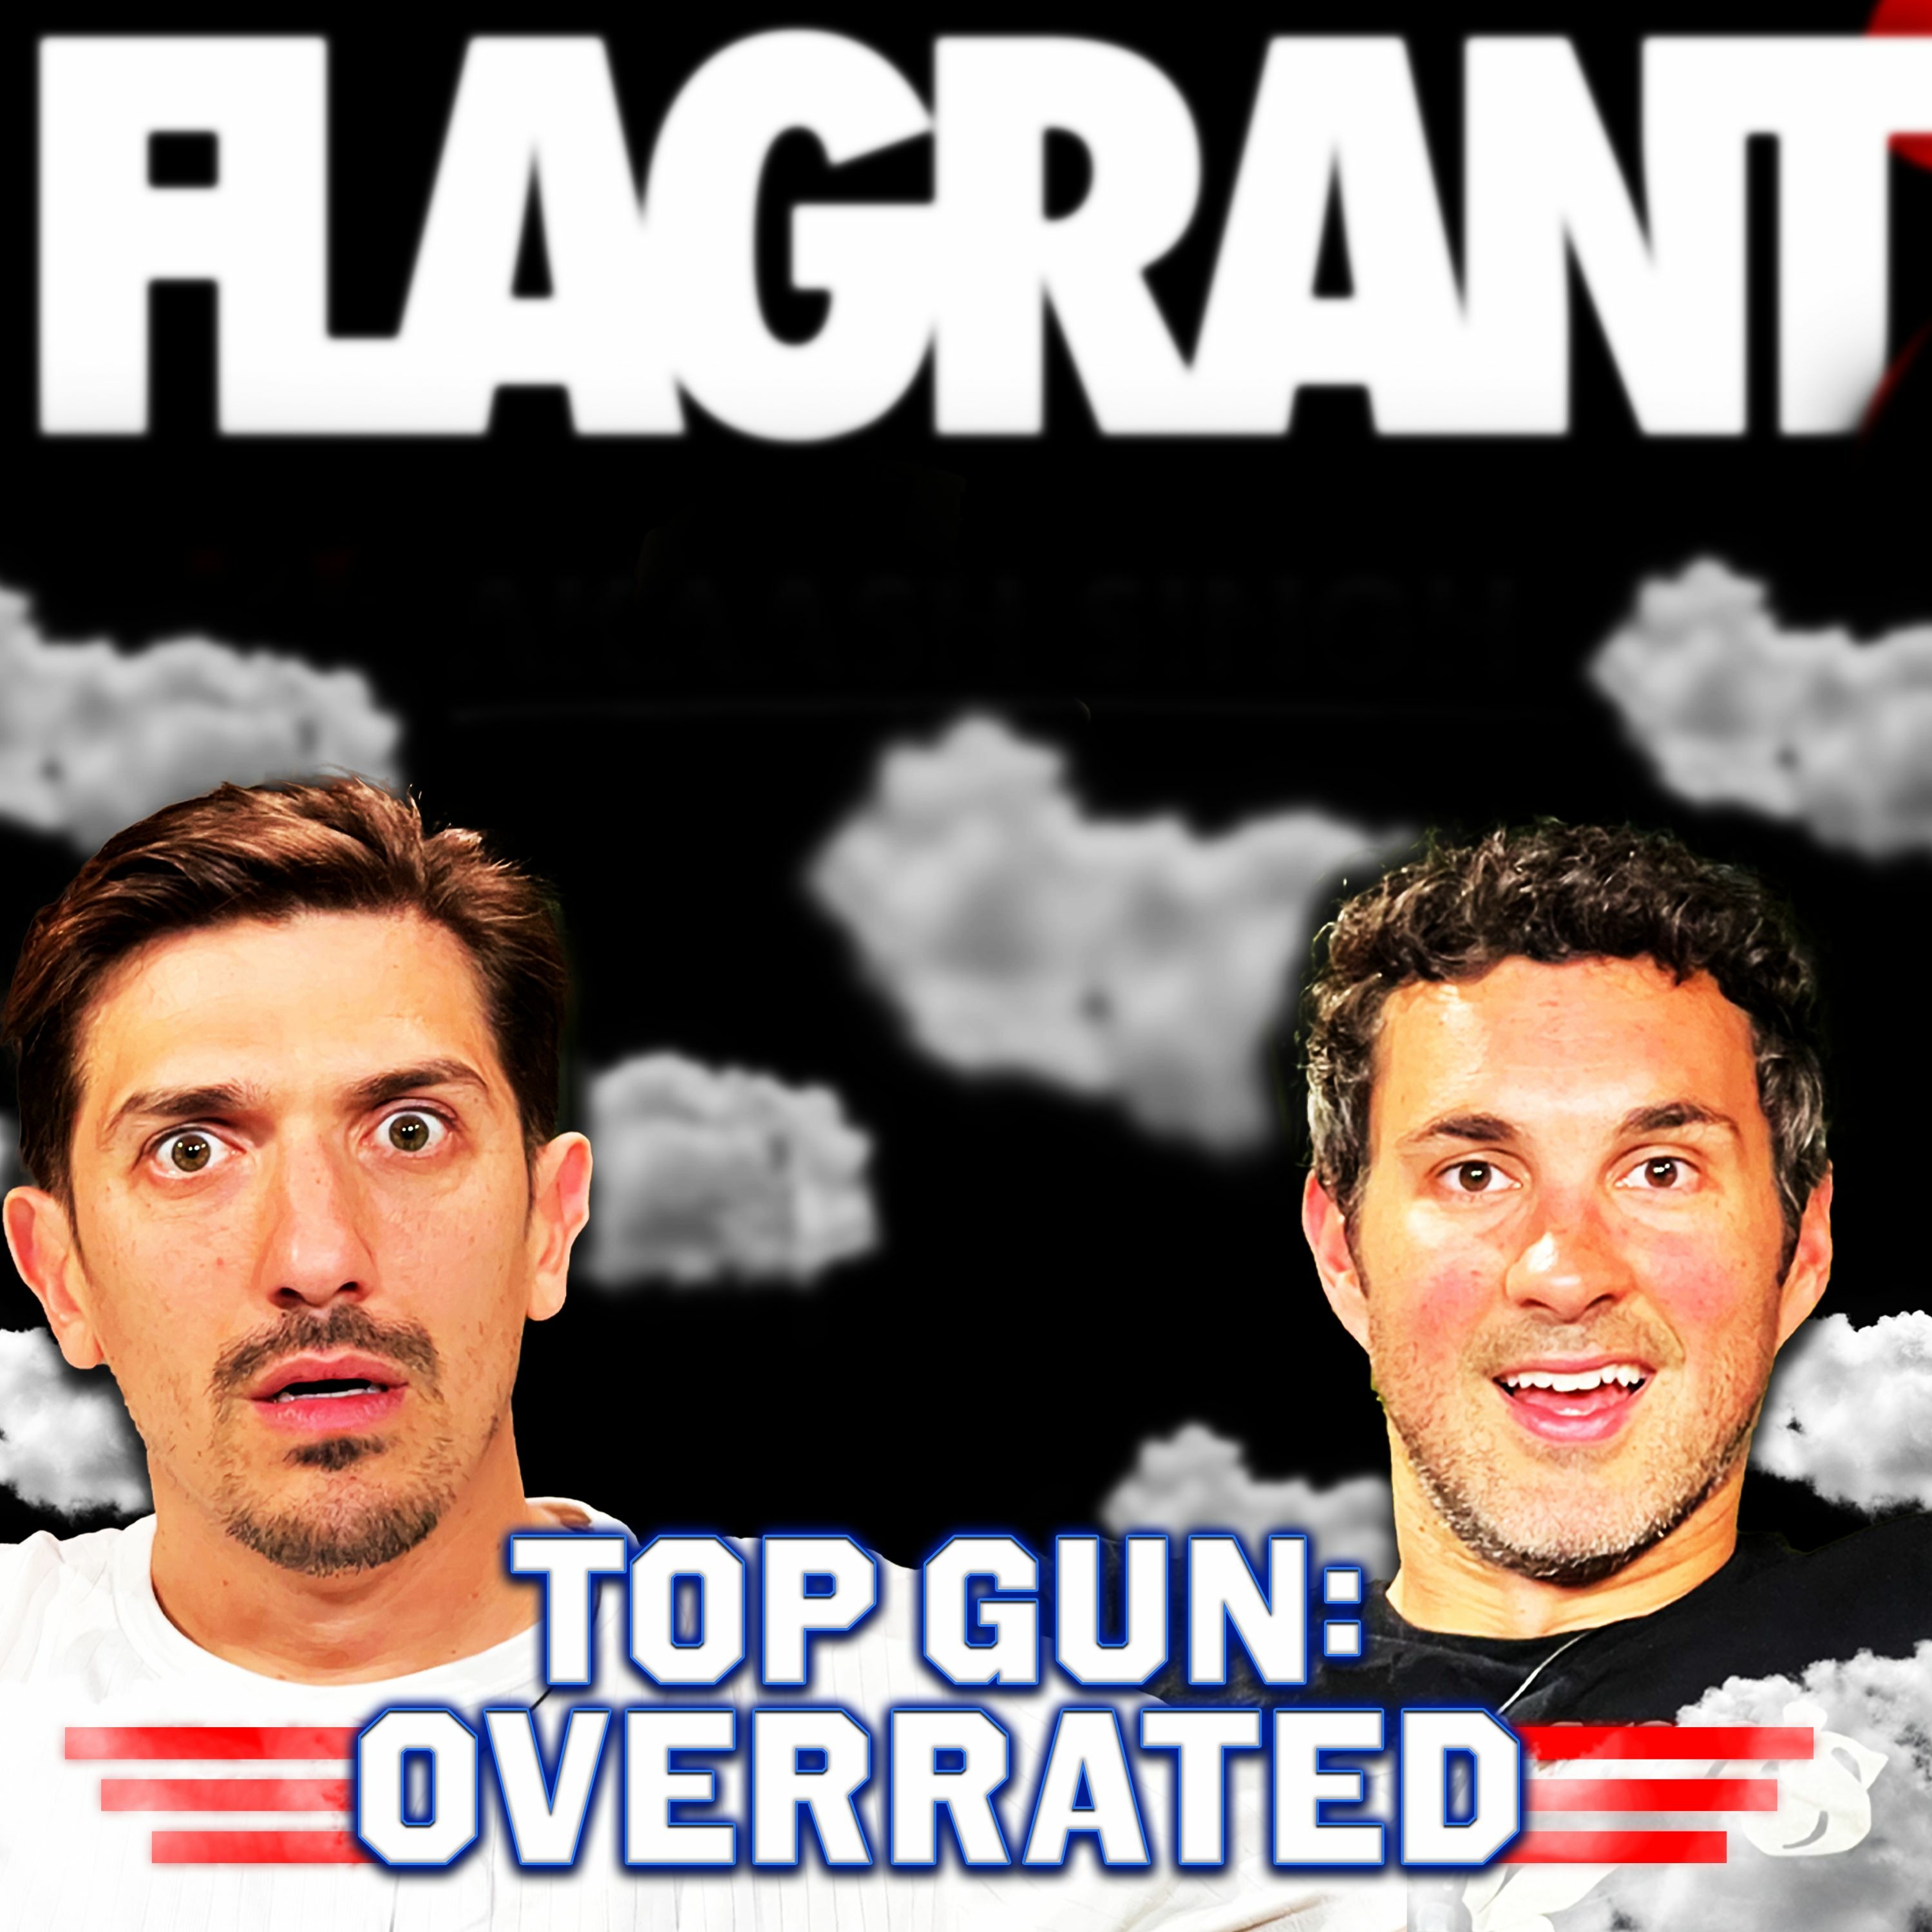 “Tom Cruise Top Gun Is OVERRATED” - Mark Normand